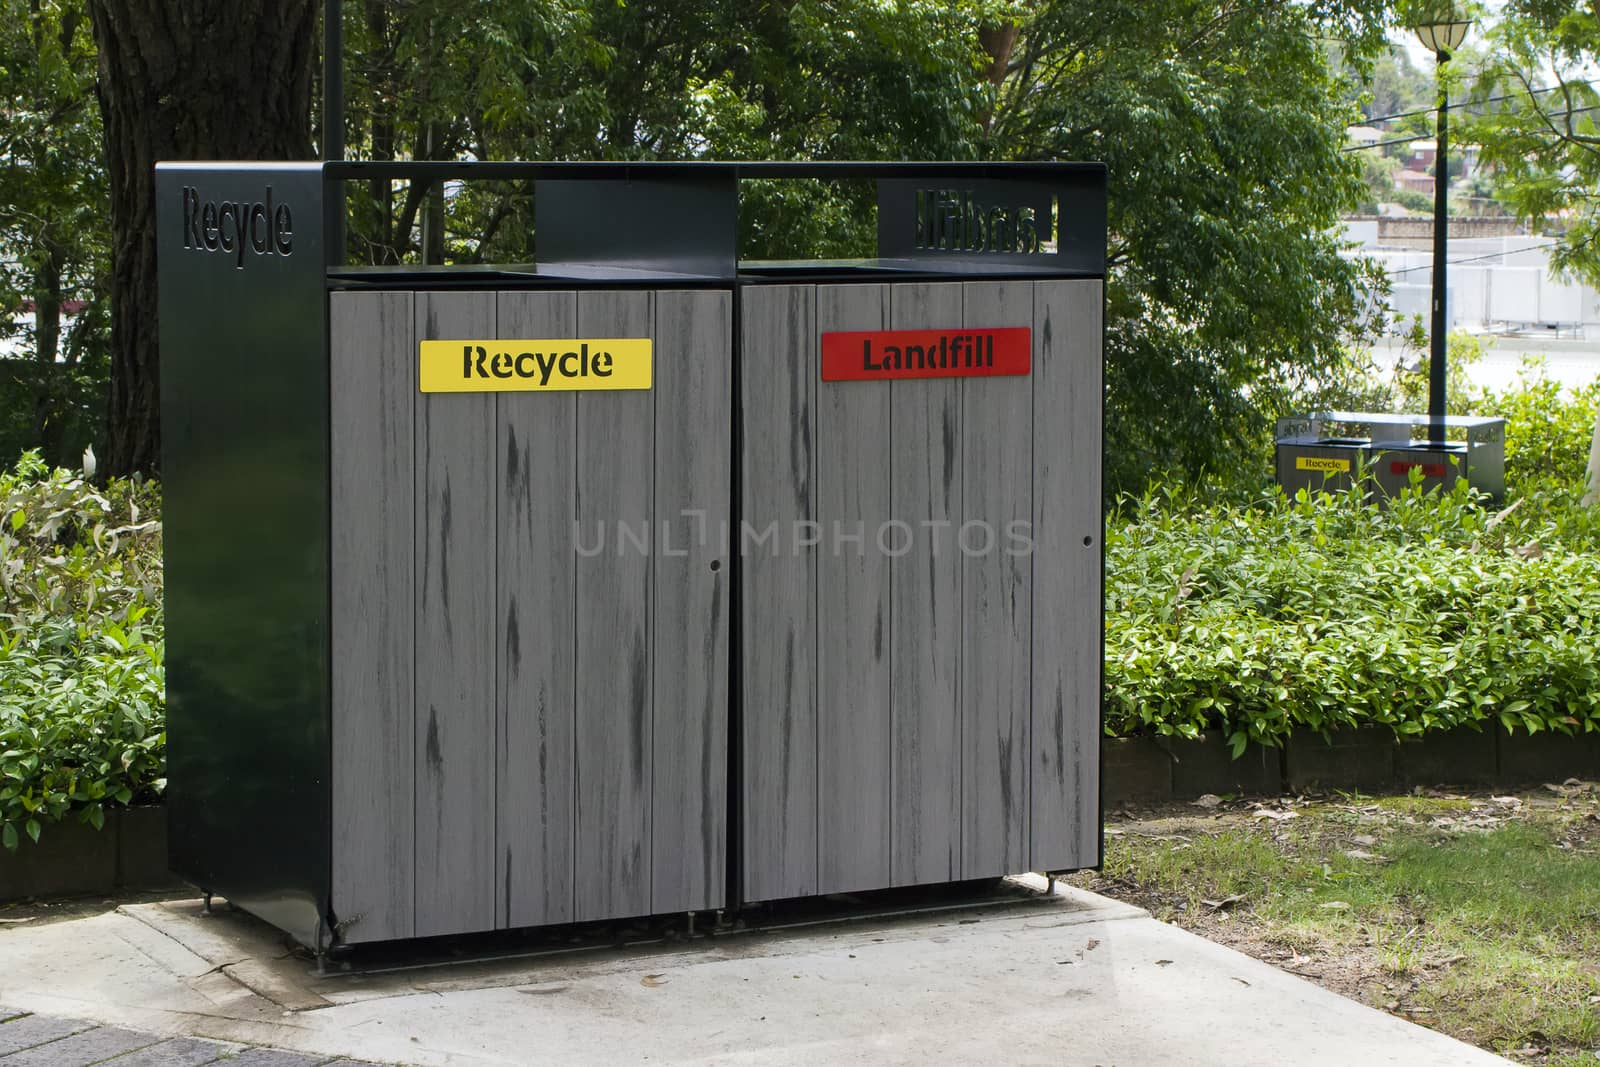 Public bin enclosure for recycle and landfill waste by definitearts